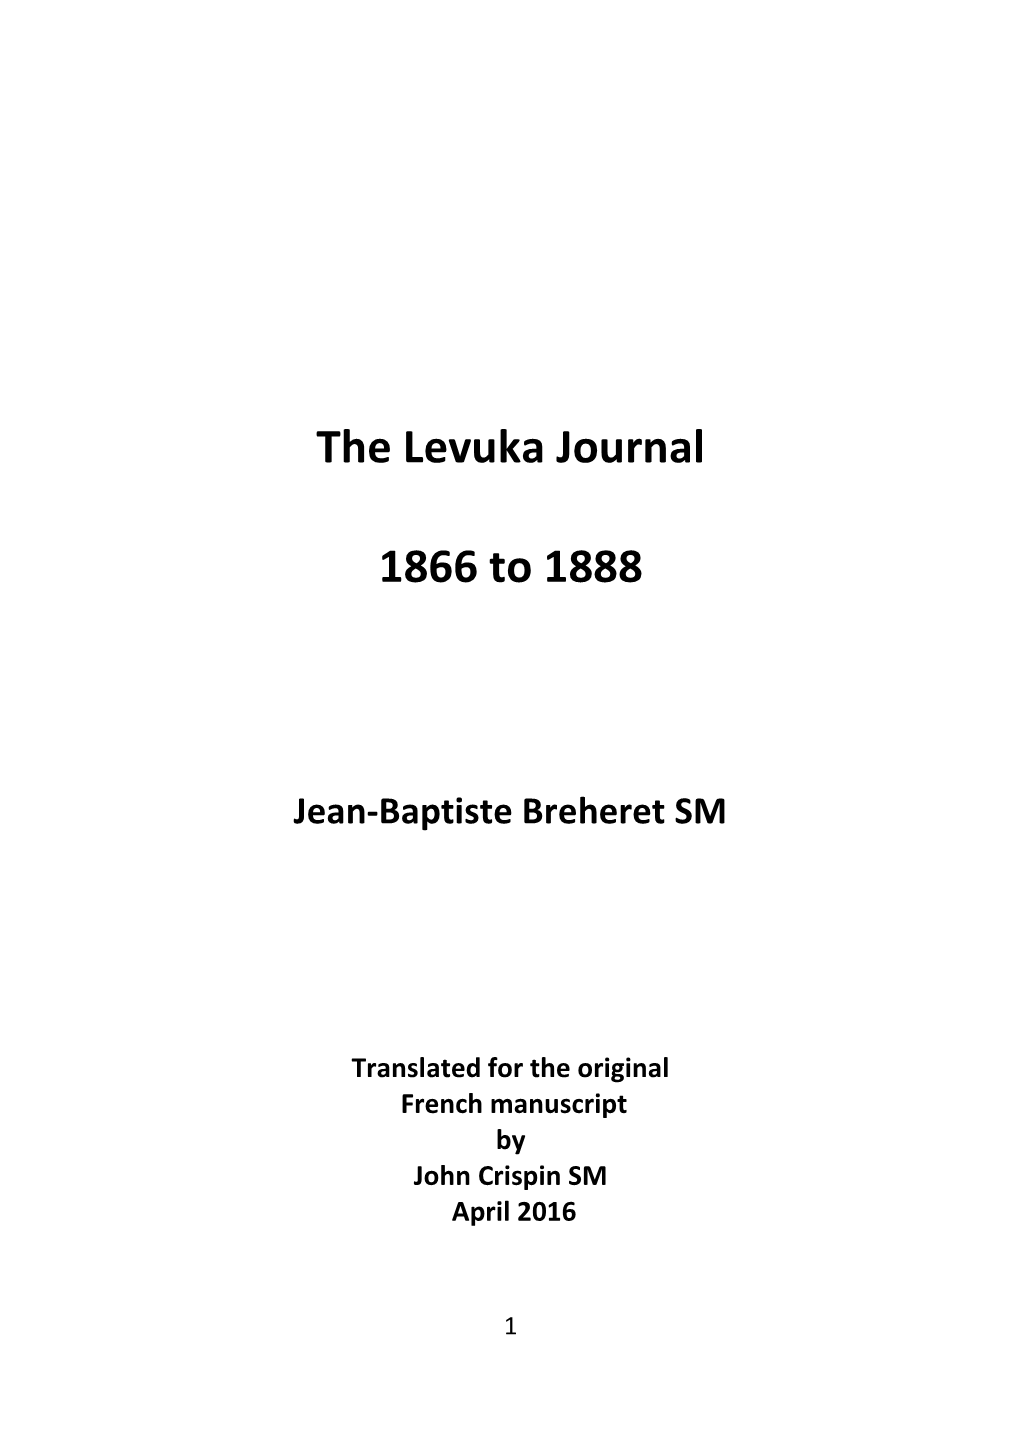 The Levuka Journal 1866 to 1888 / Jean-Batiste Breheret ; Translated from French to English by John Crispin